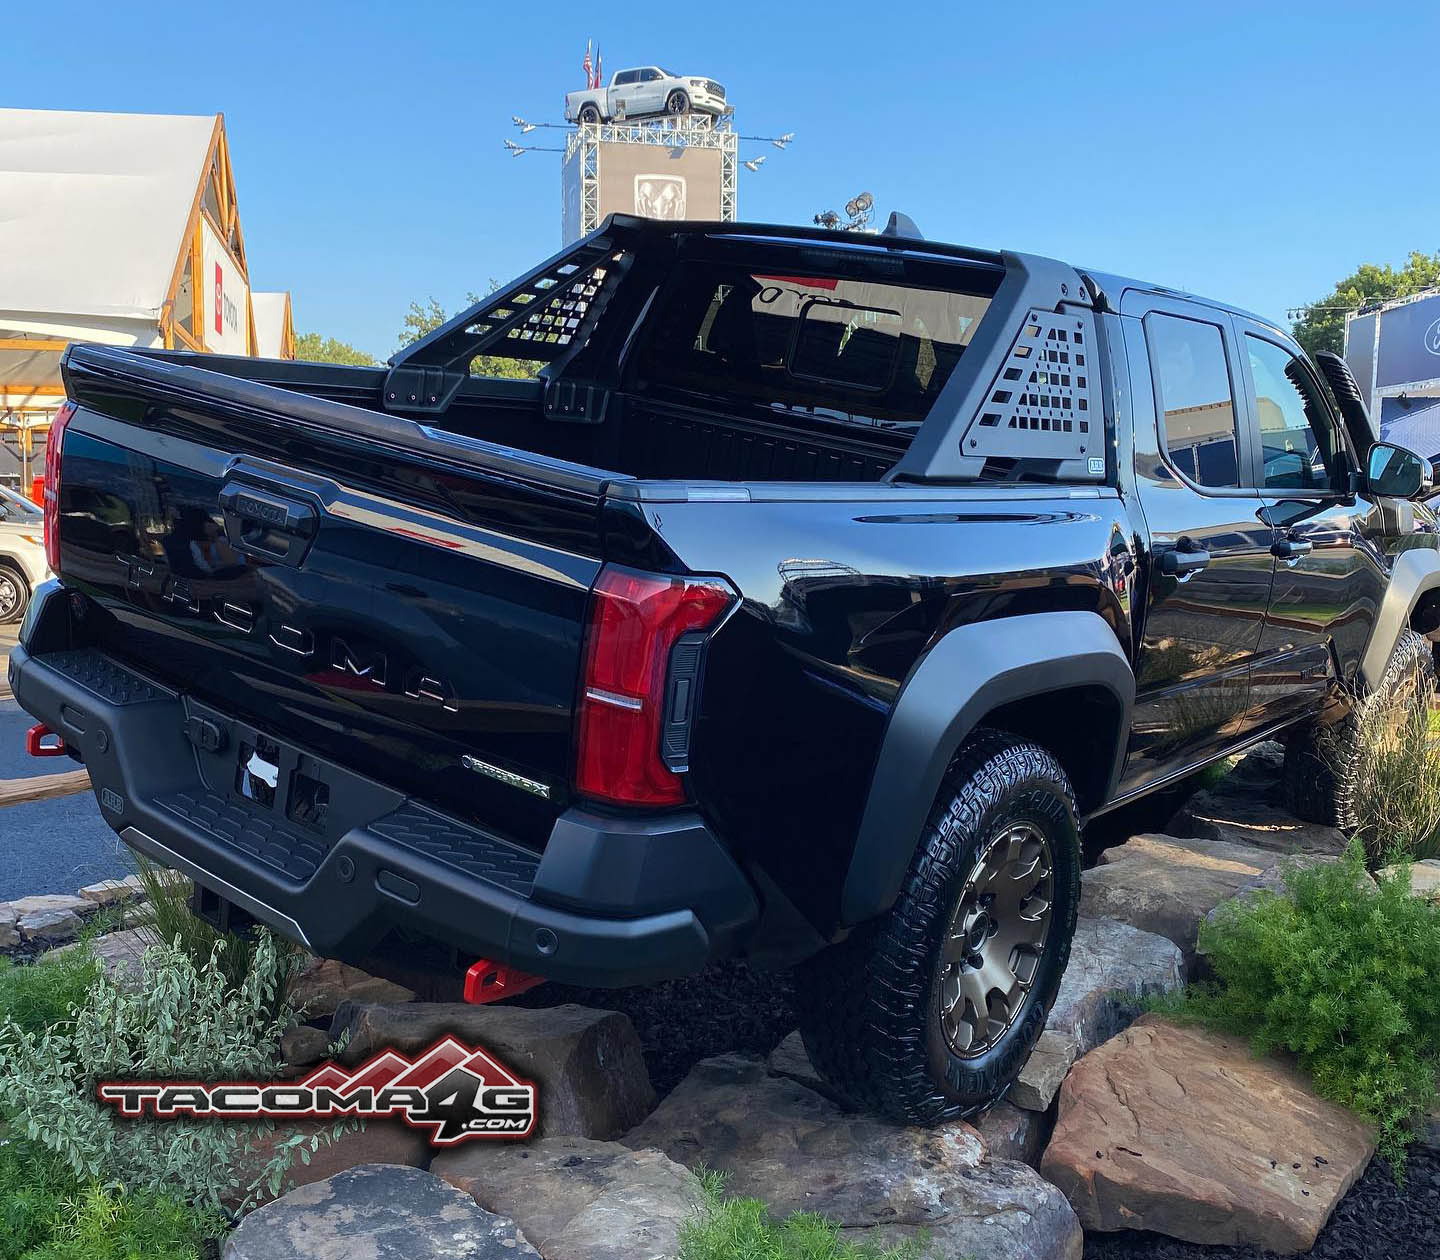 2024 Tacoma First Look: Black 2024 Tacoma TRD Pro. + Trailhunters in Black and Bronze Oxide Short Bed🤩 BLACK 2024 Tacoma Trailhunter 1